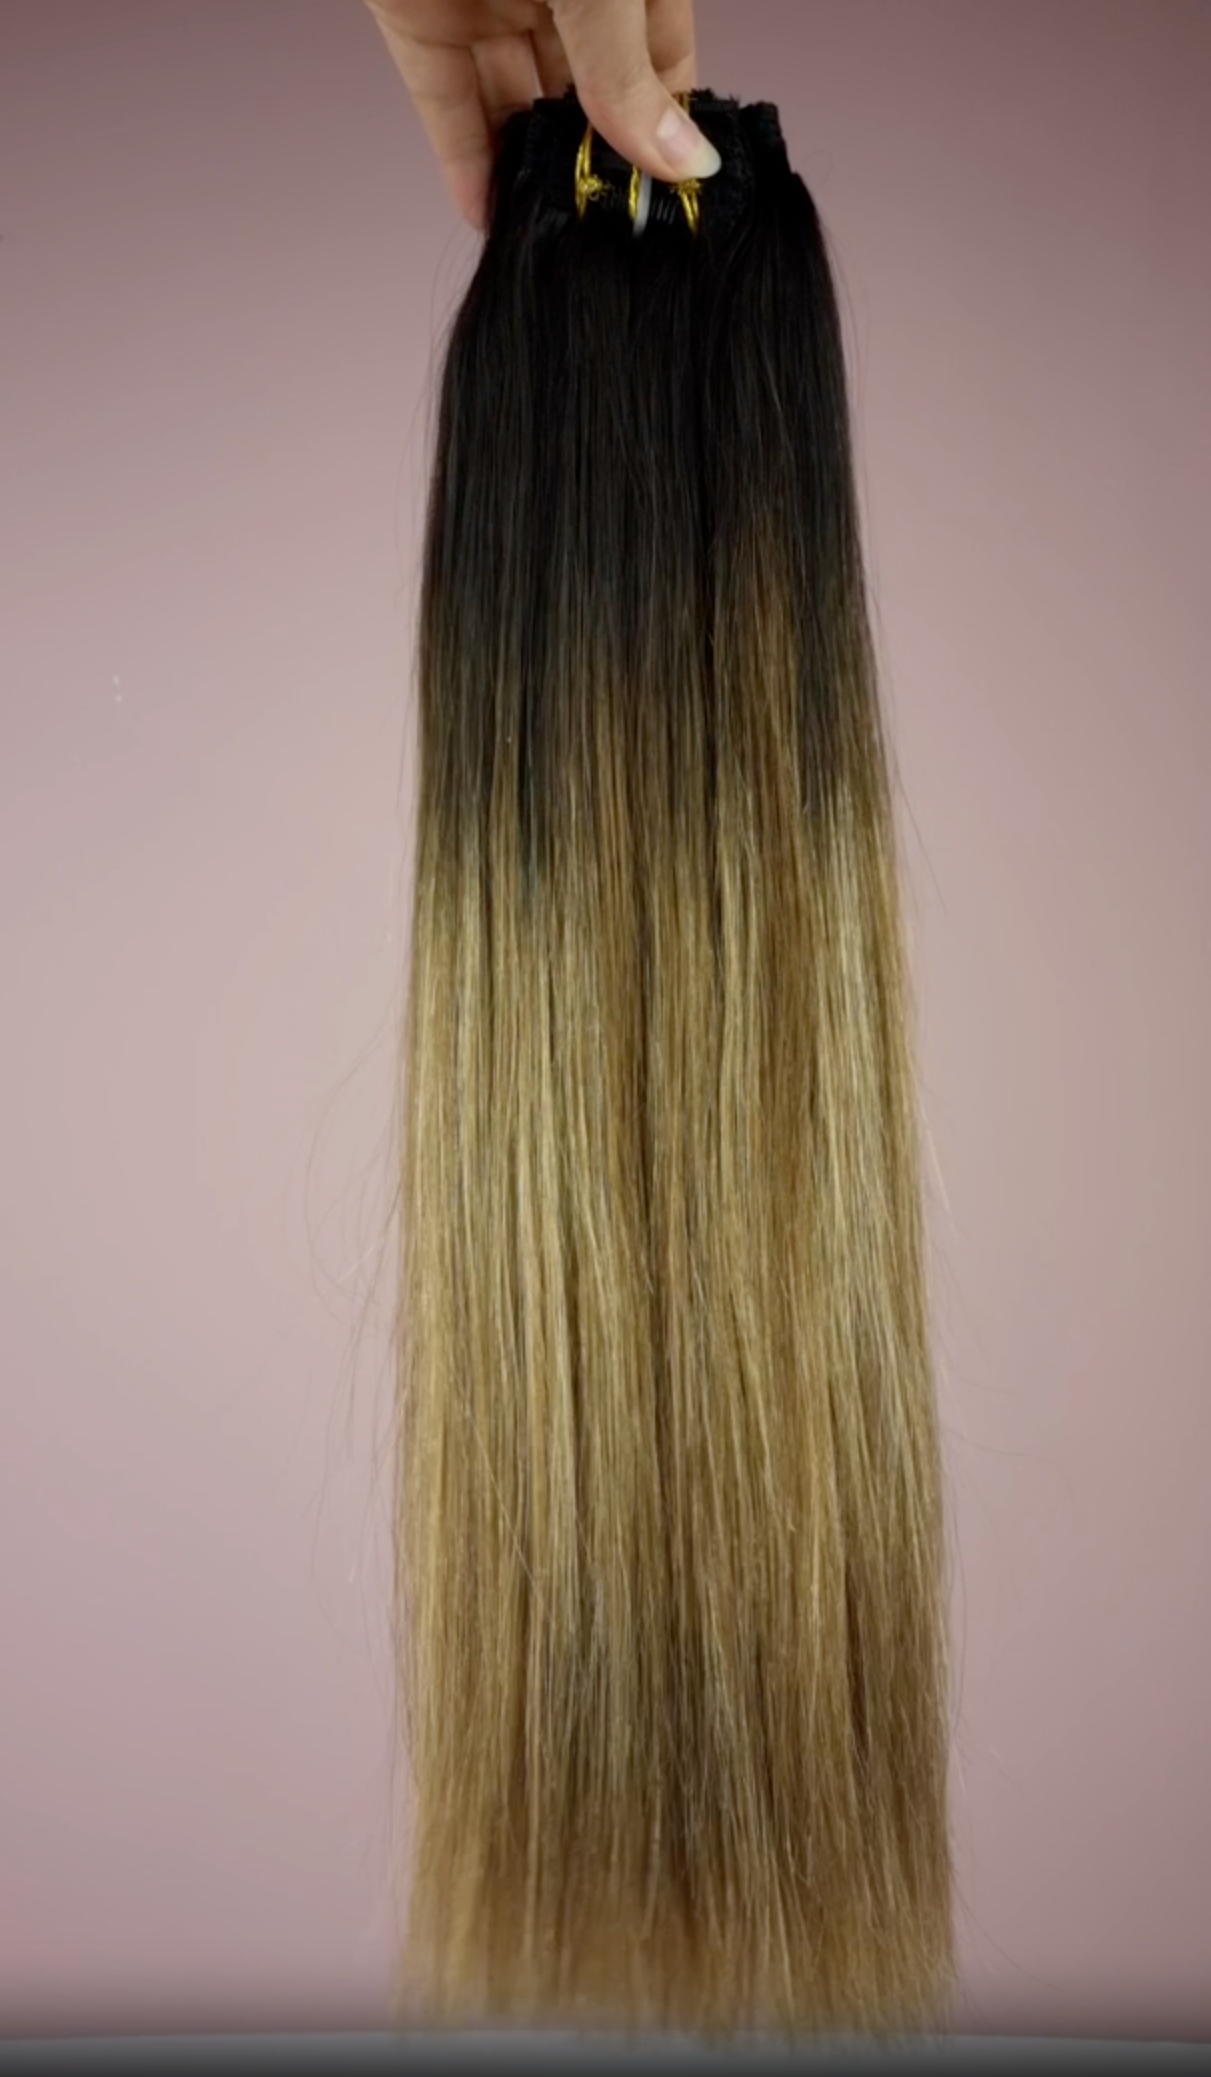 Mocha Bronde Balayage clip-in hairextensions ☕ 50cm - 300g